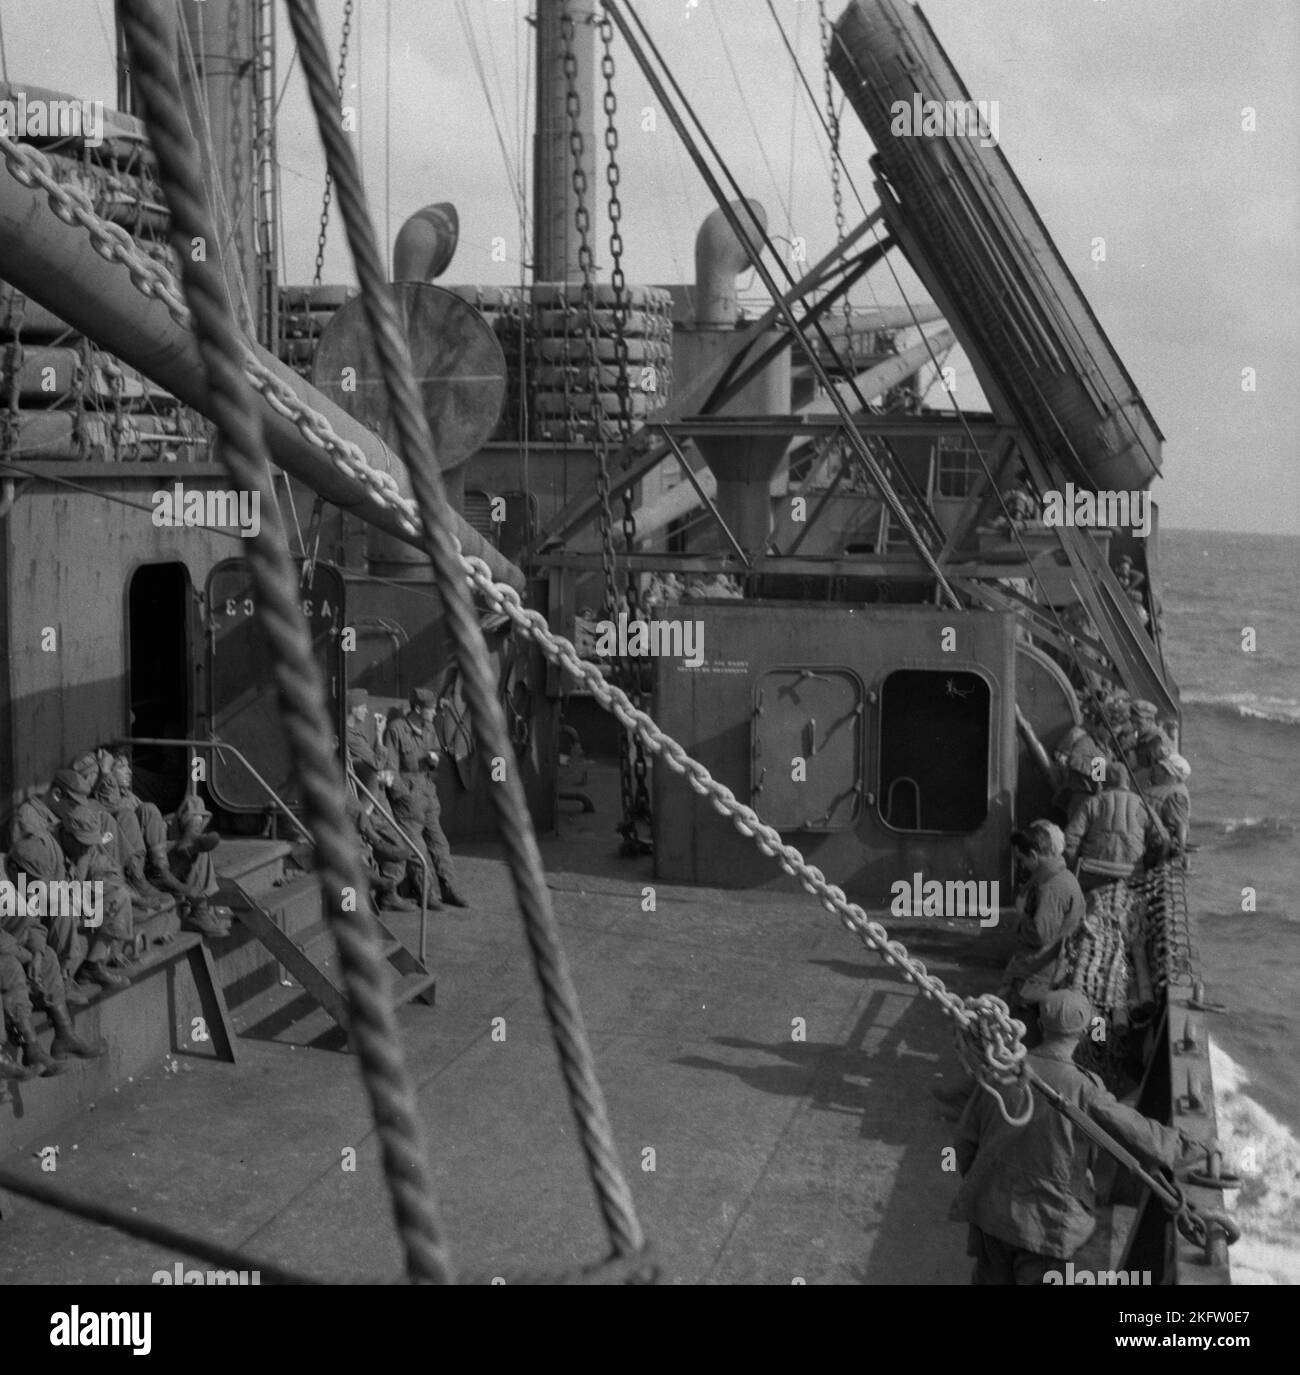 Men sitting on deck of ship. United States Army veterans coming home on the Elgin Victory ship at the conclusion of World War II. SS Elgin Victory, a type VC2-S-AP2 Victory ship built by Permanente Metals Stock Photo